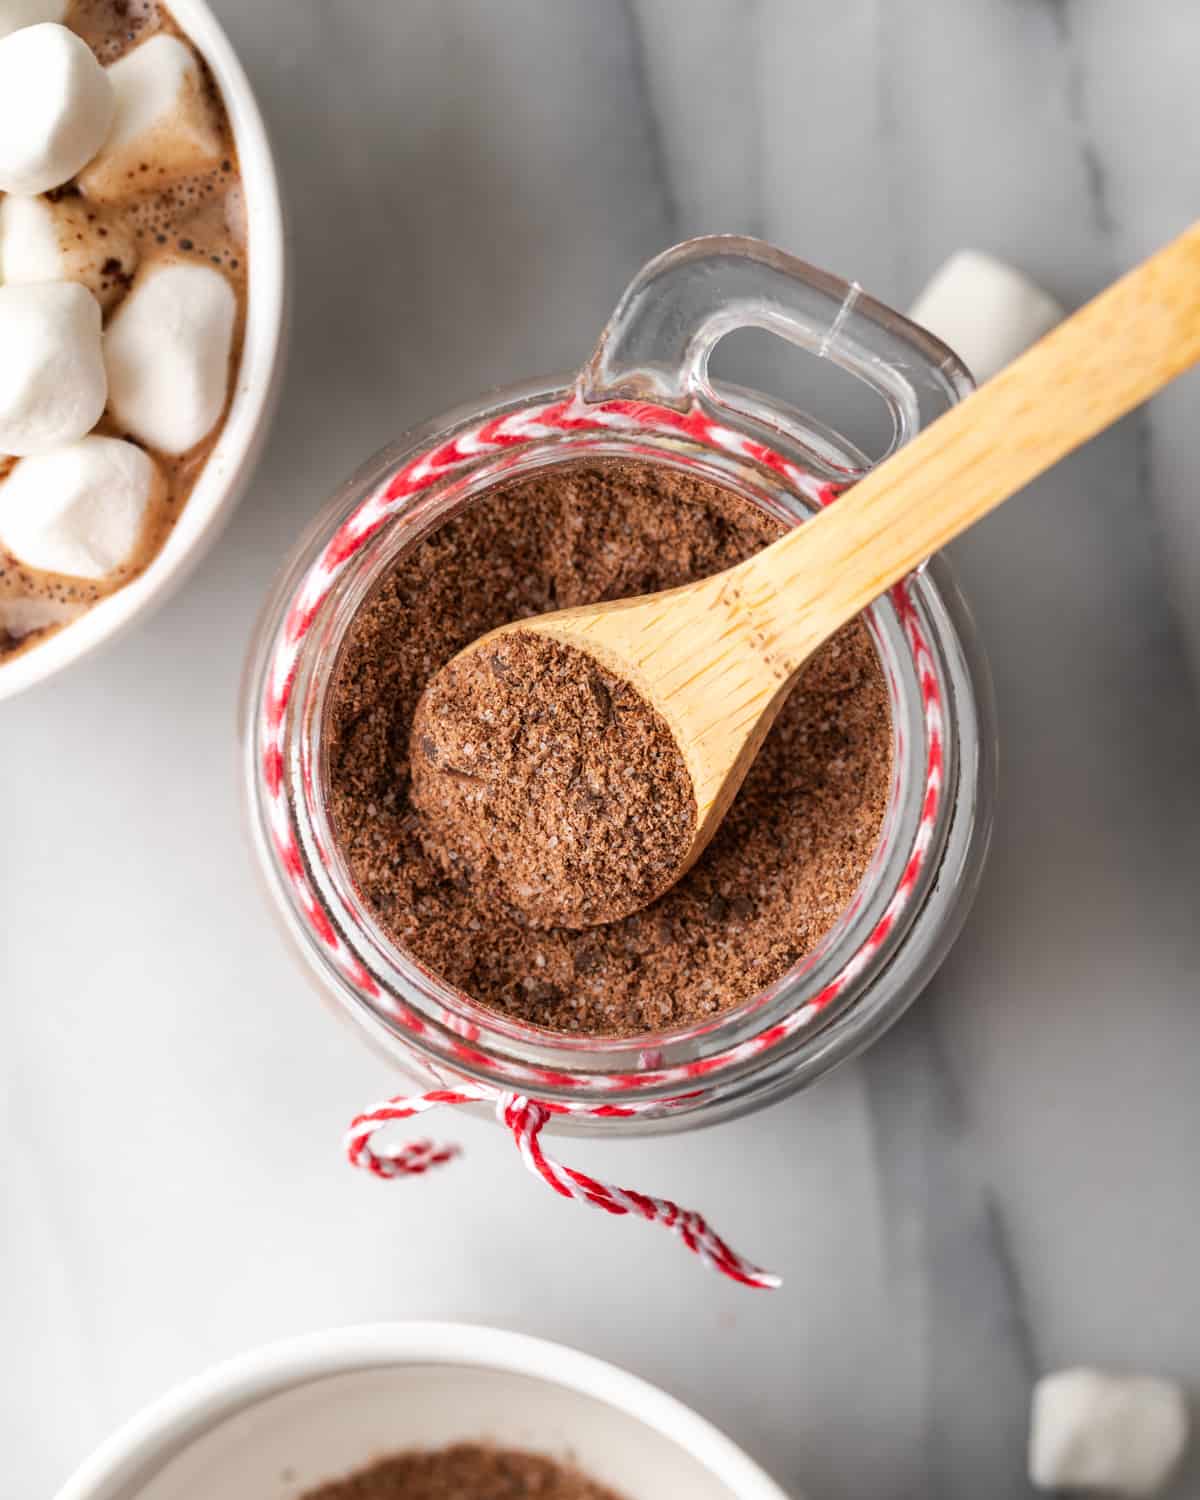 A small wooden spoon scooping hot chocolate mix from a jar.